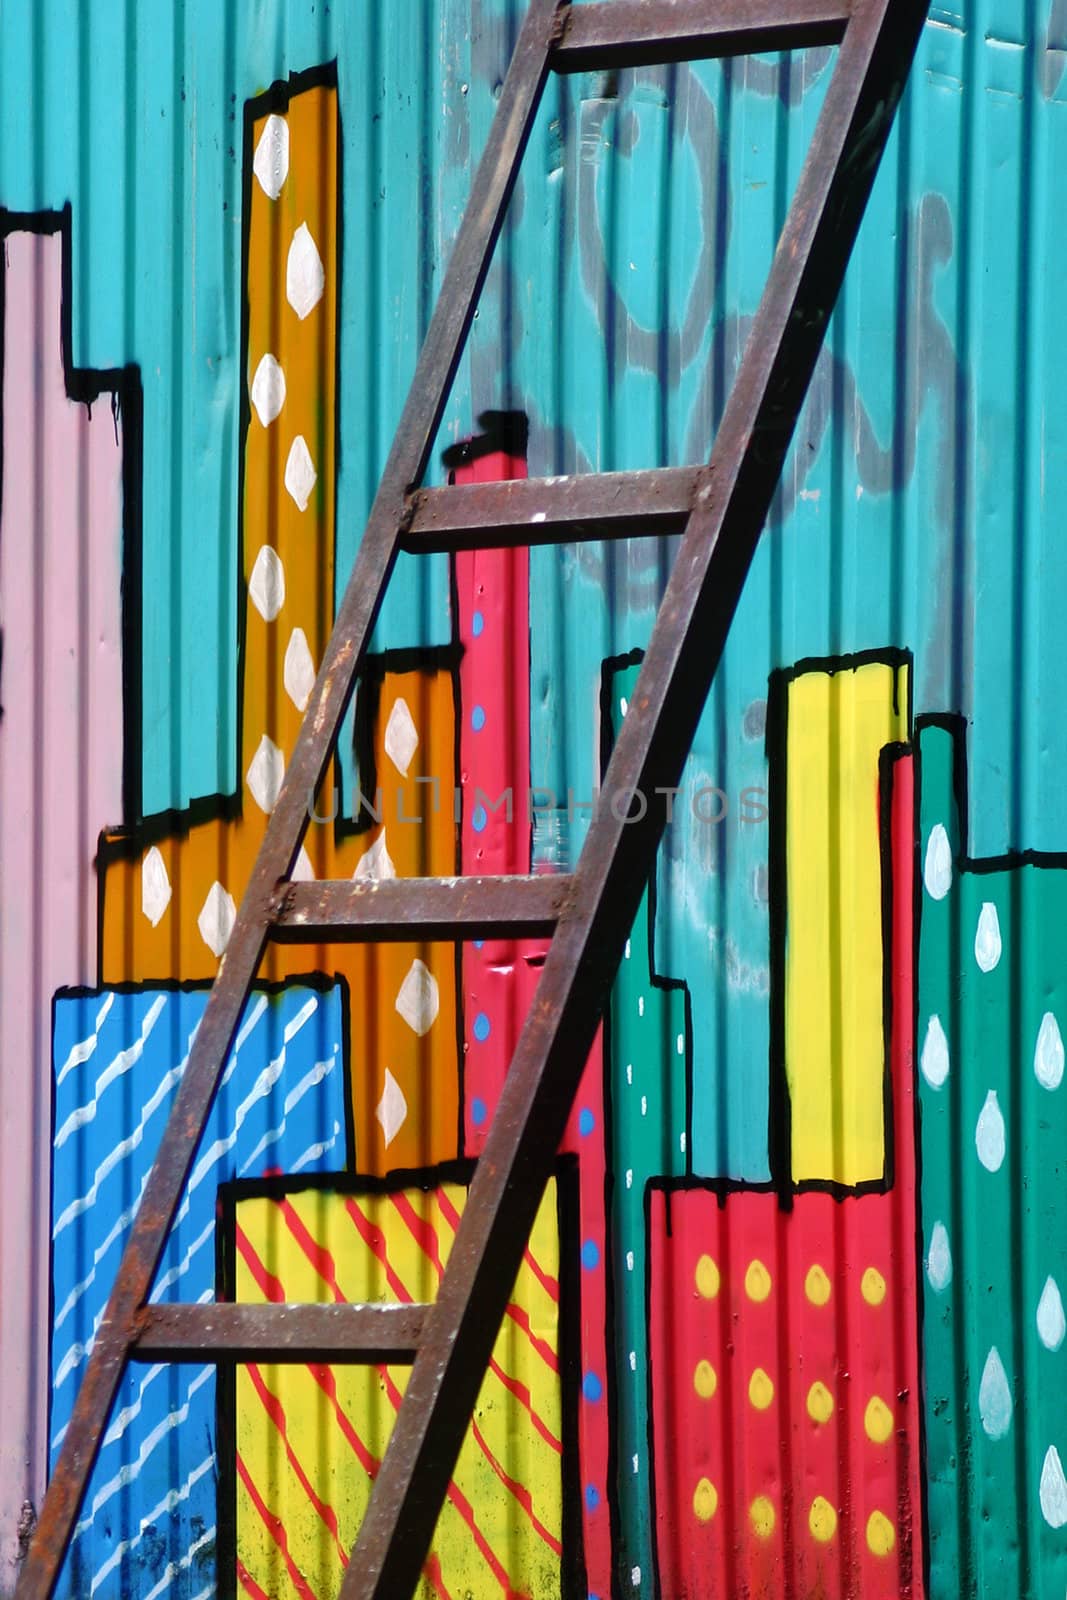 Rusted ladder and the abstract city drawn on a wall